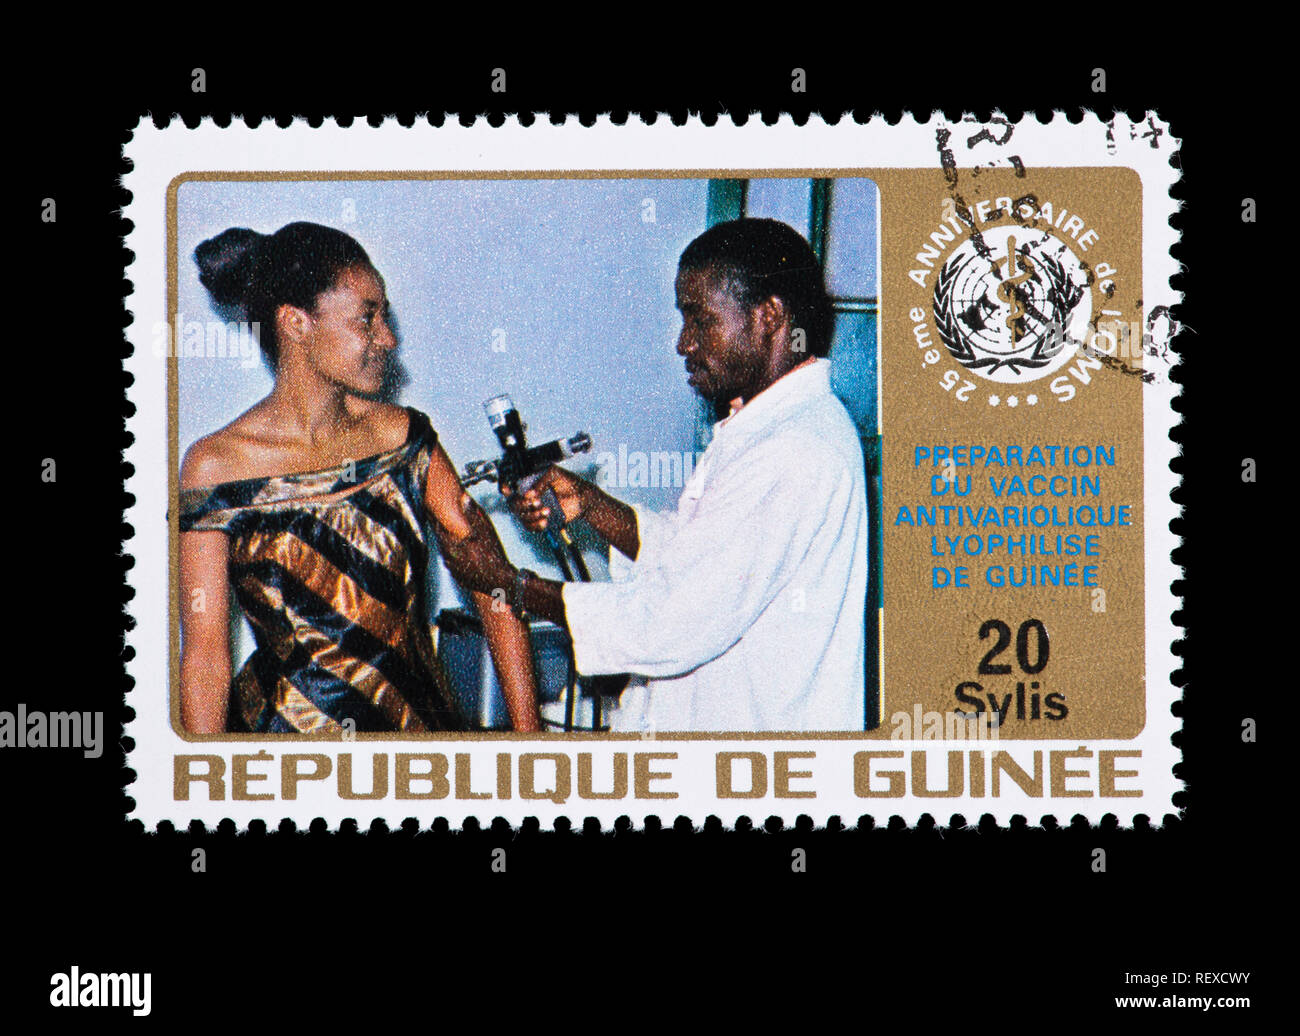 Postage stamp from Guinea but depicting a woman being vaccinated and the WHO emblem. Stock Photo